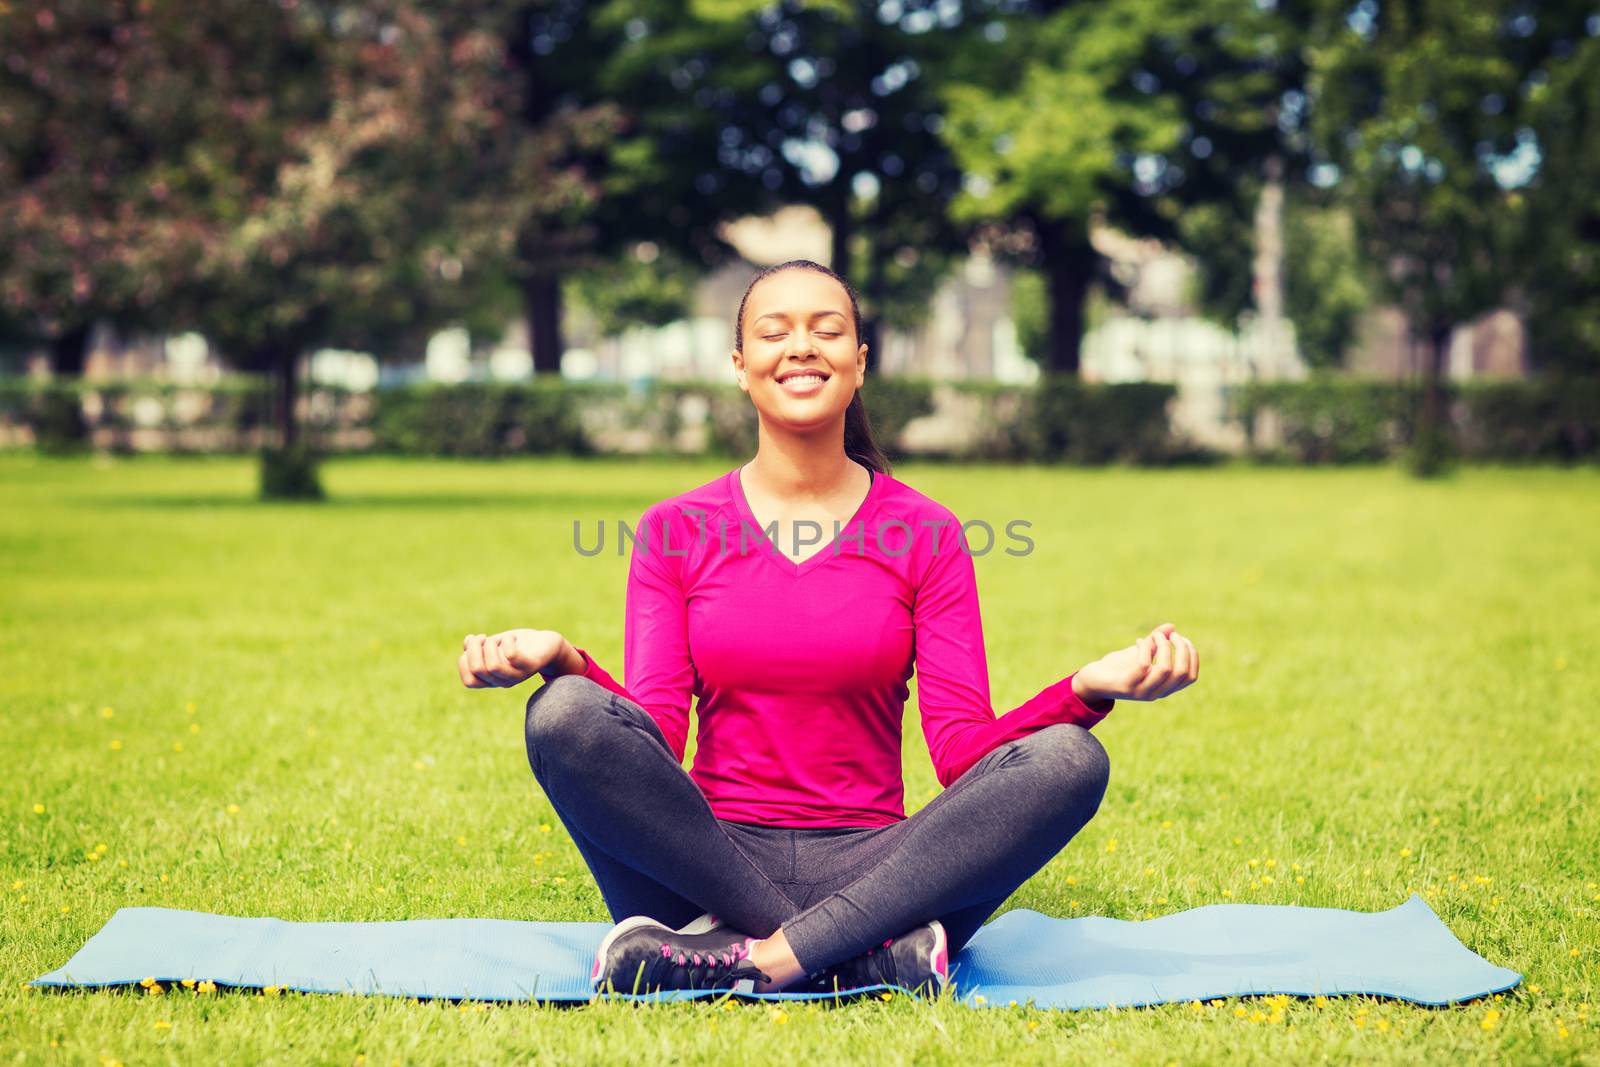 sport, meditation, park and lifestyle concept - smiling woman meditating on mat outdoors